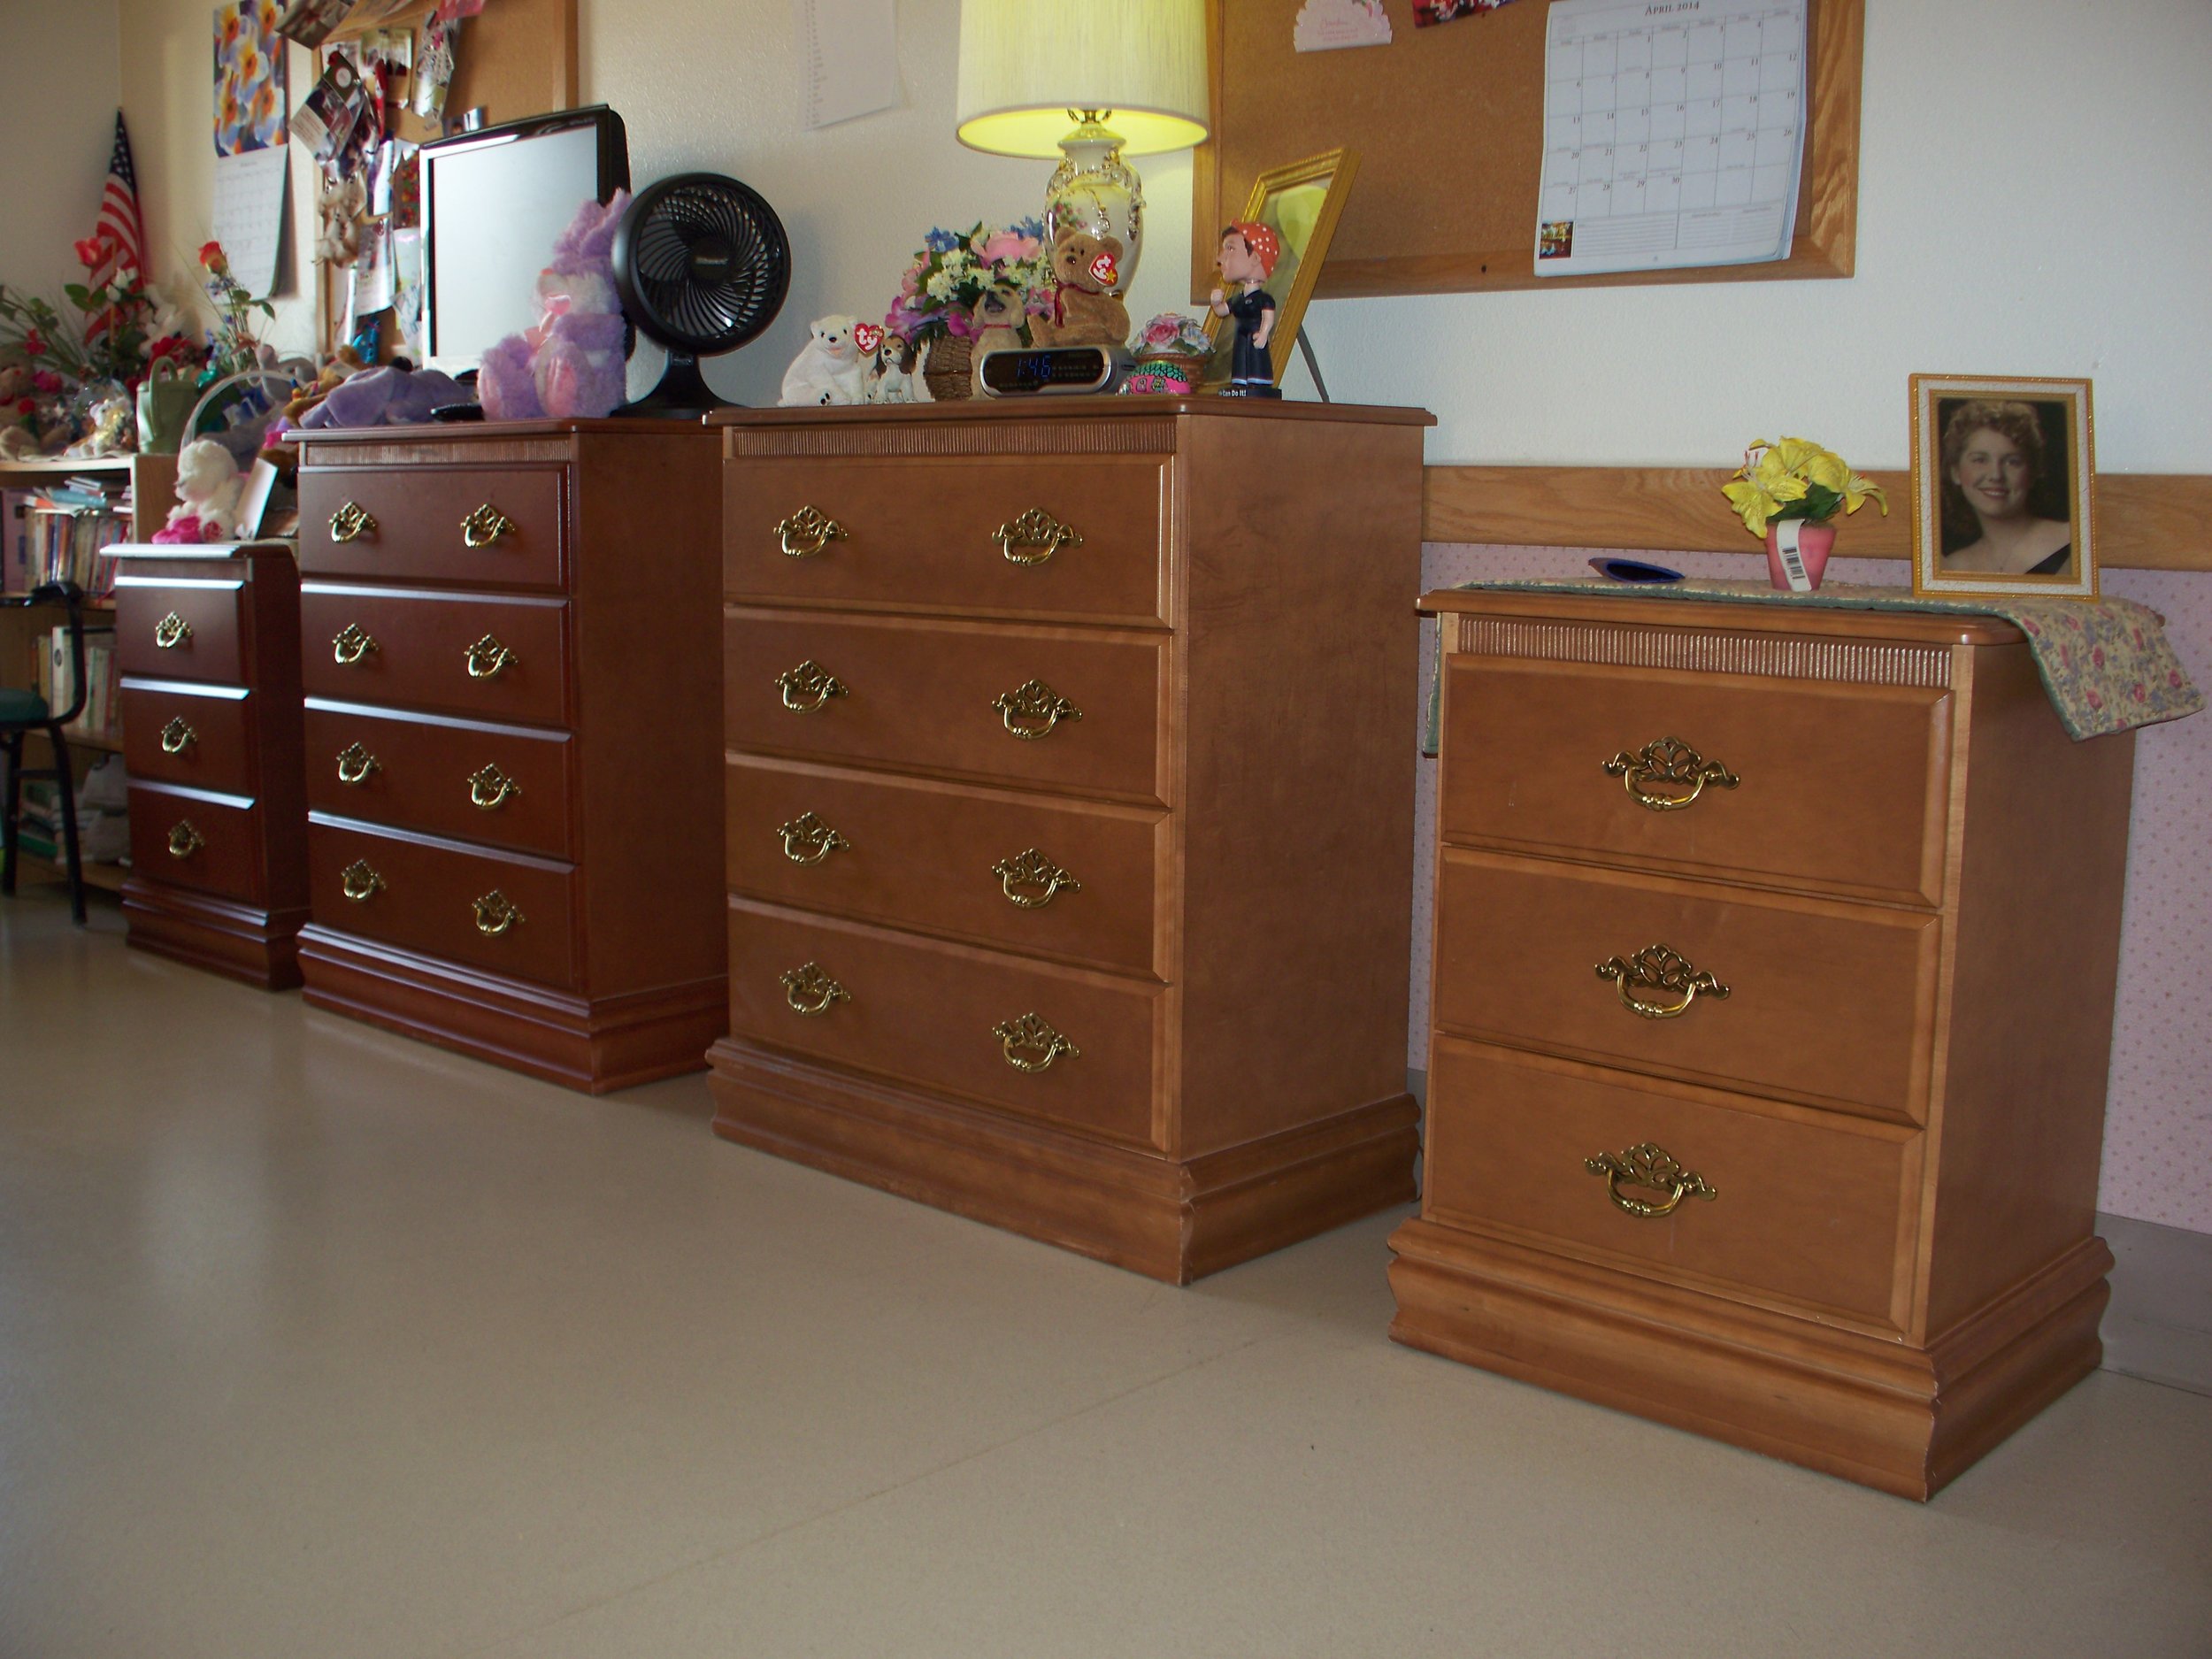 Dressers for each resident's room at Extended Care